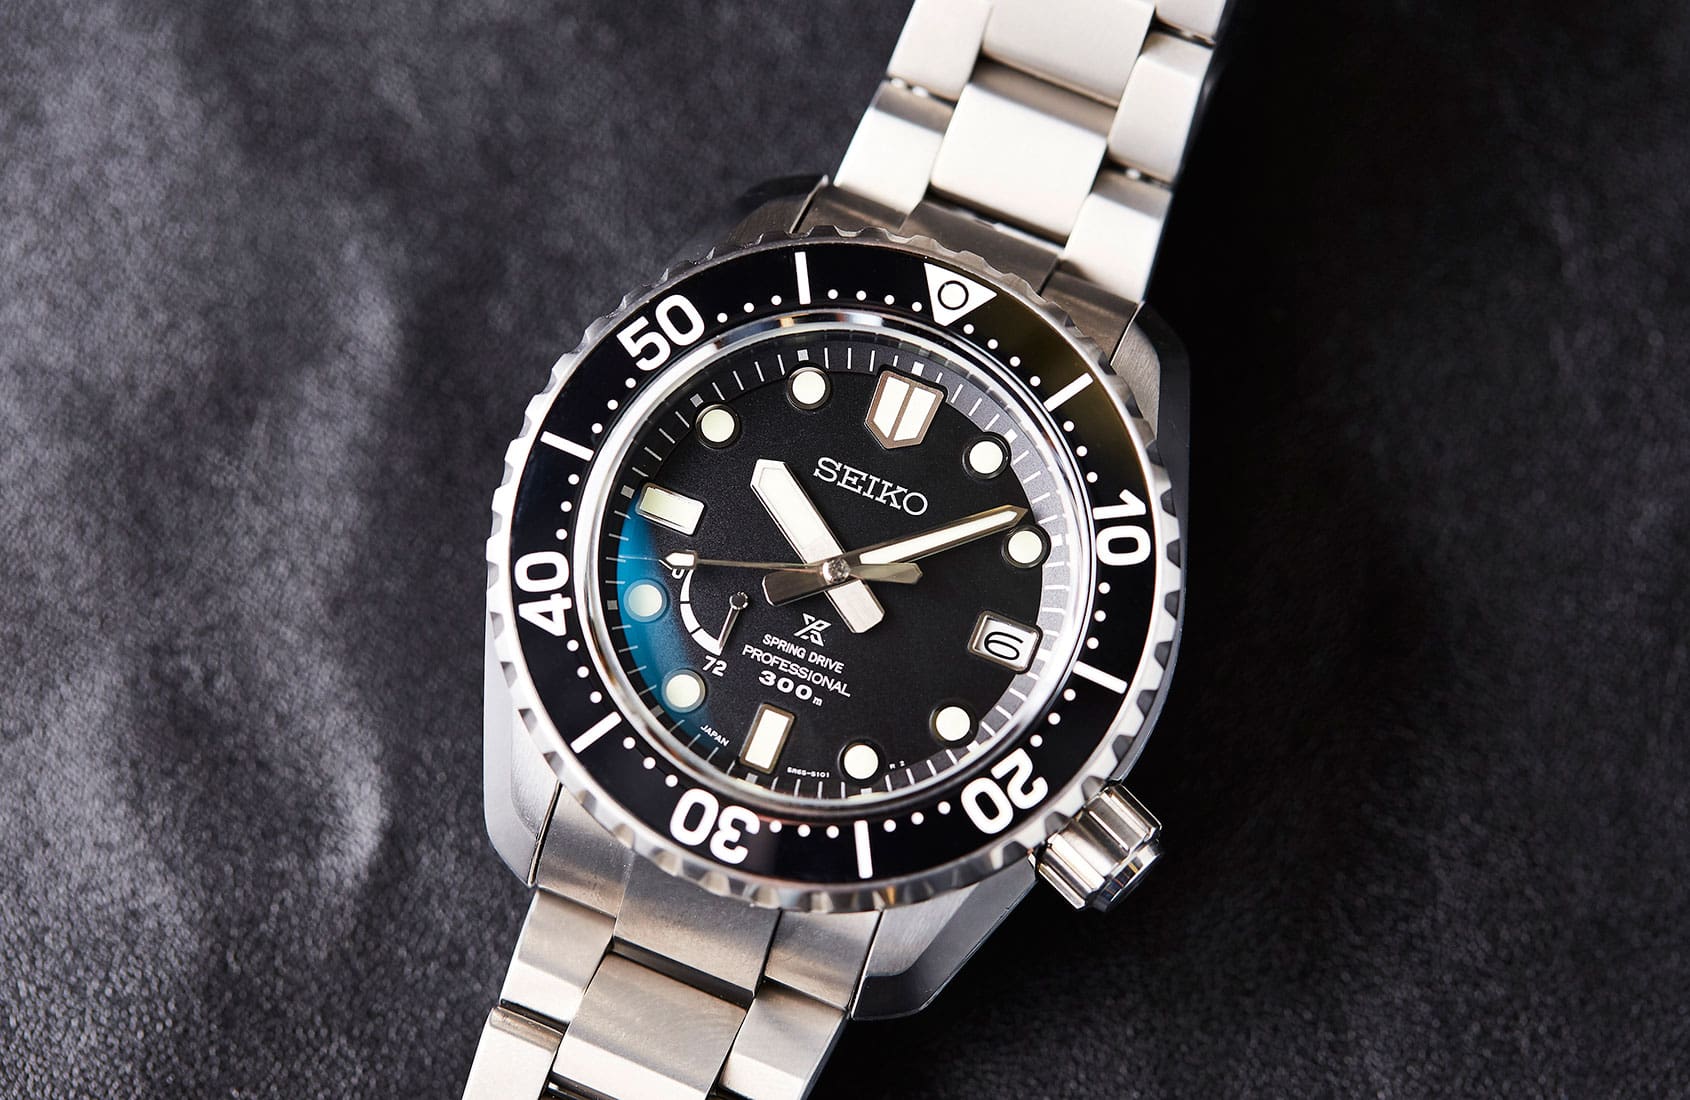 These were 5 of the best new Seiko watches of 2019